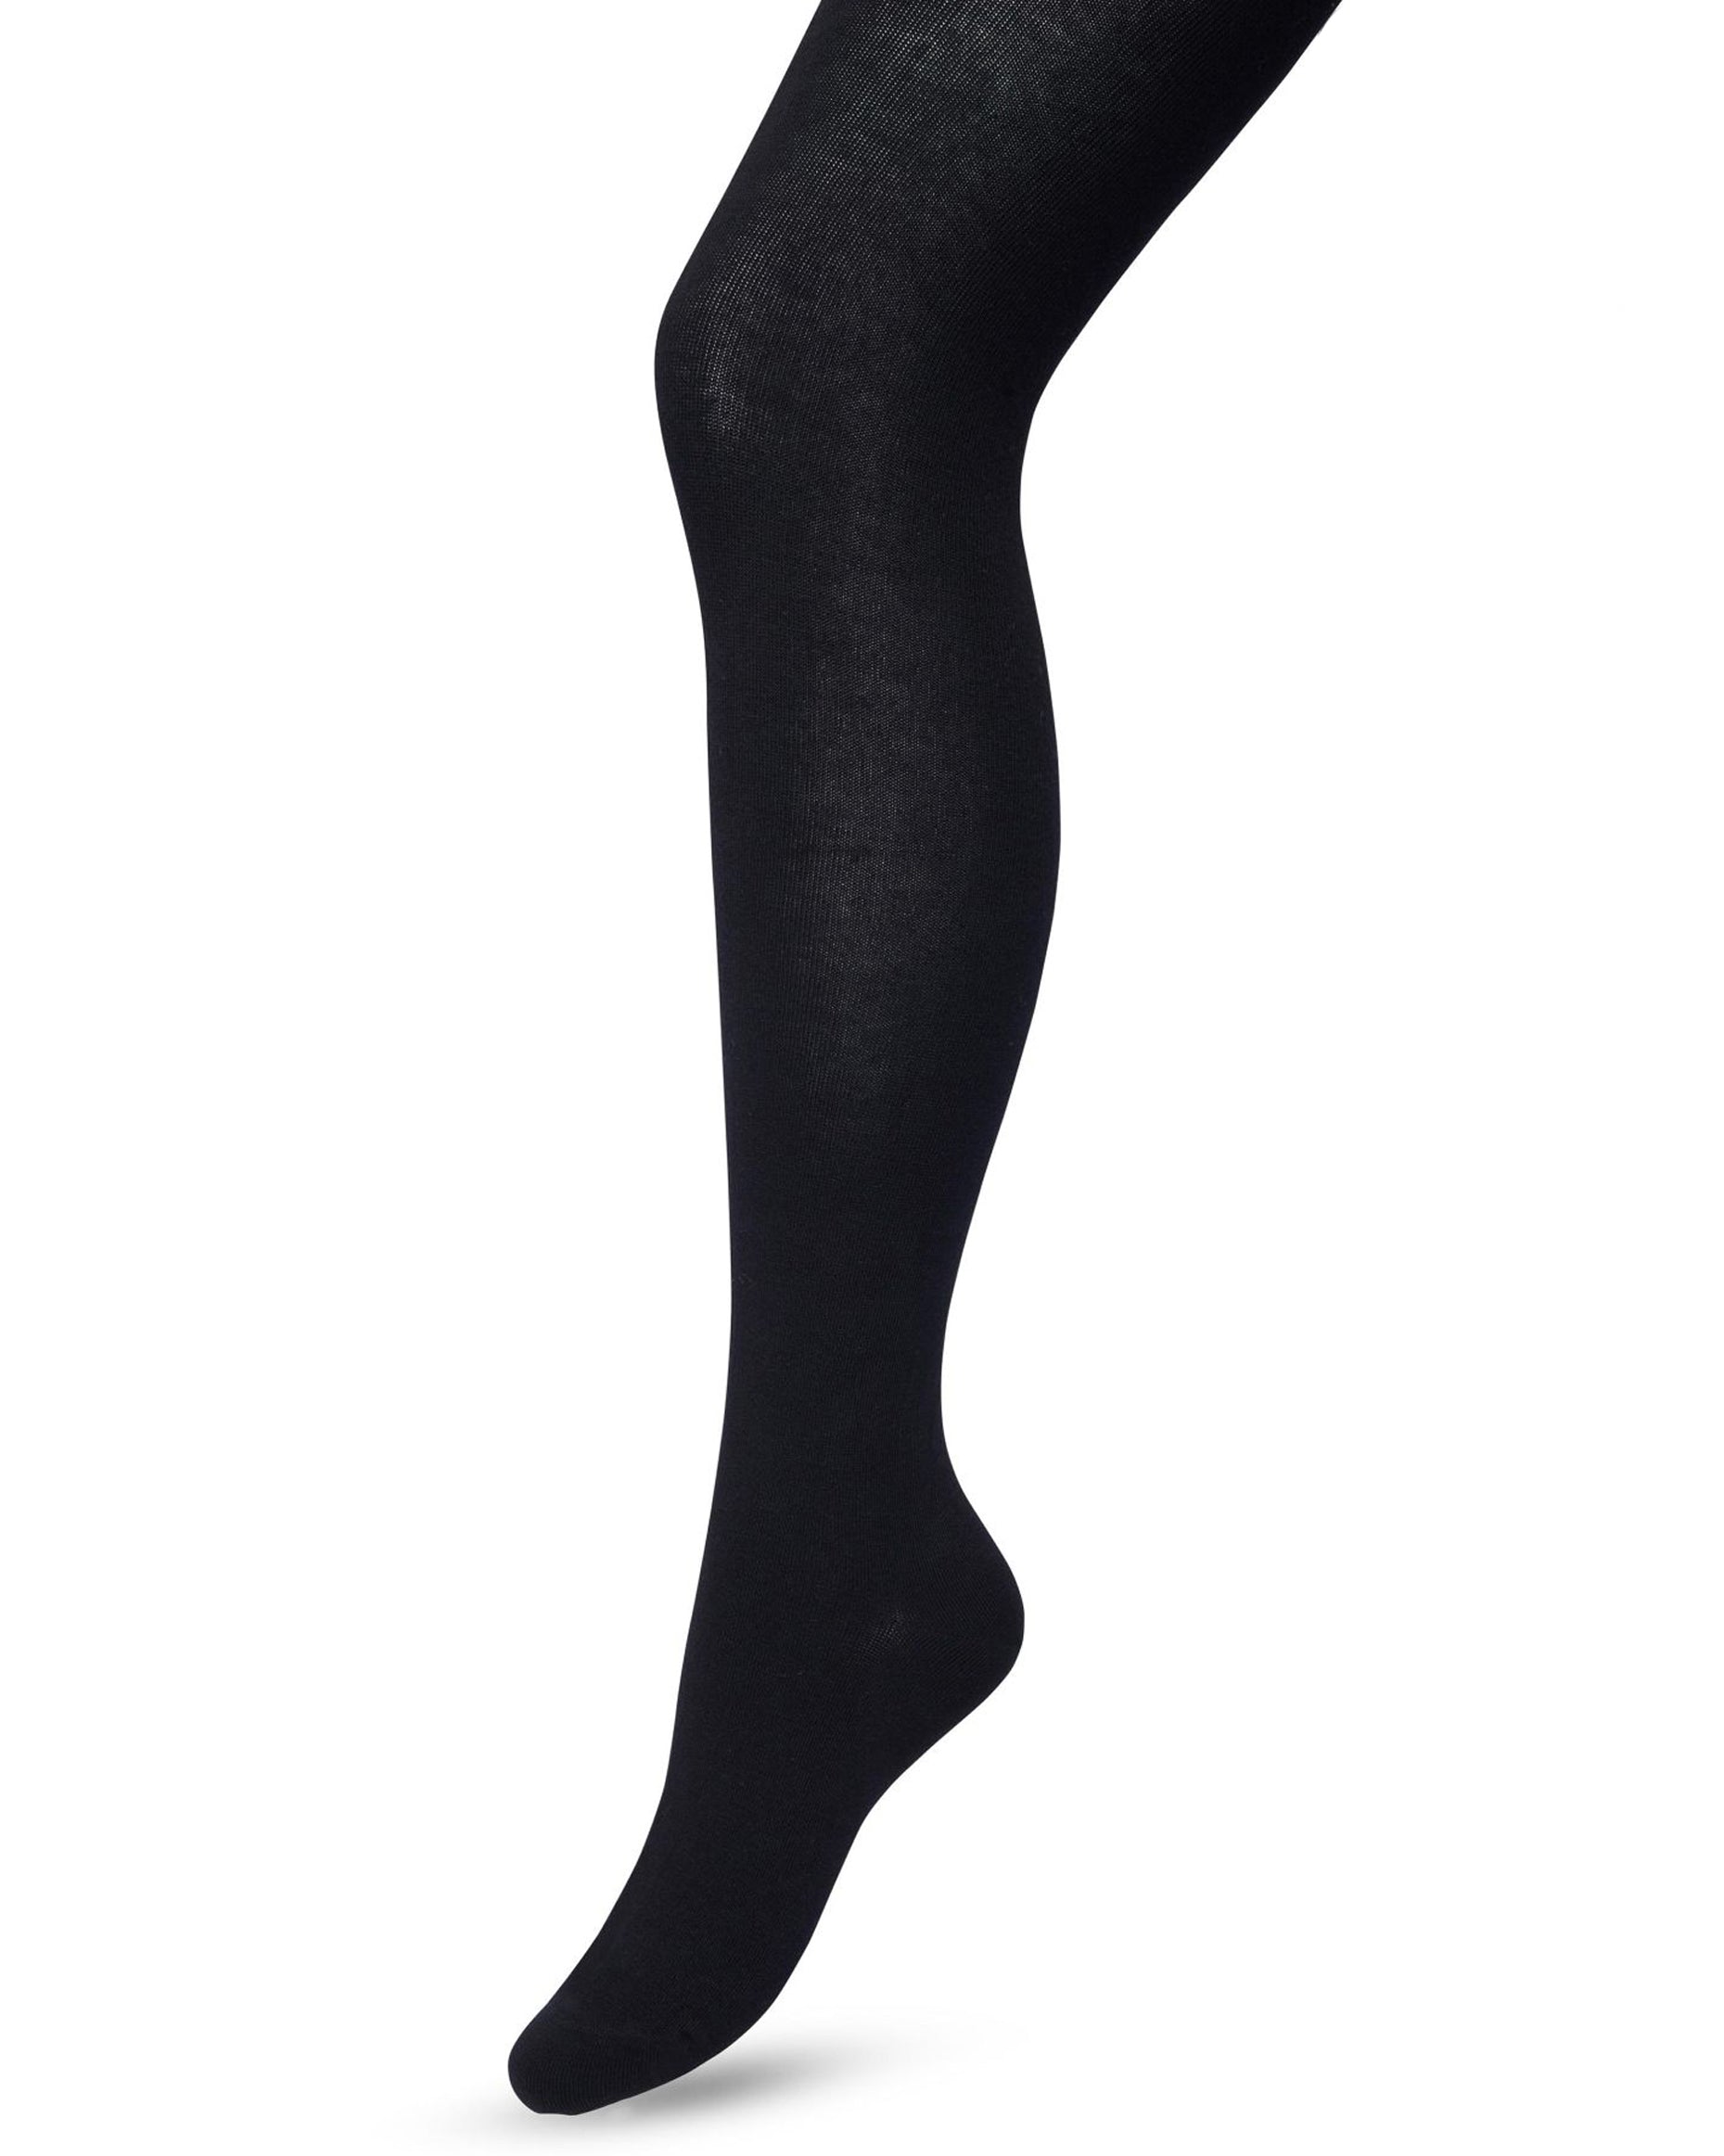 Bonnie Doon Bio Cotton Tights - Black warm and soft knitted organic cotton Winter thermal tights.